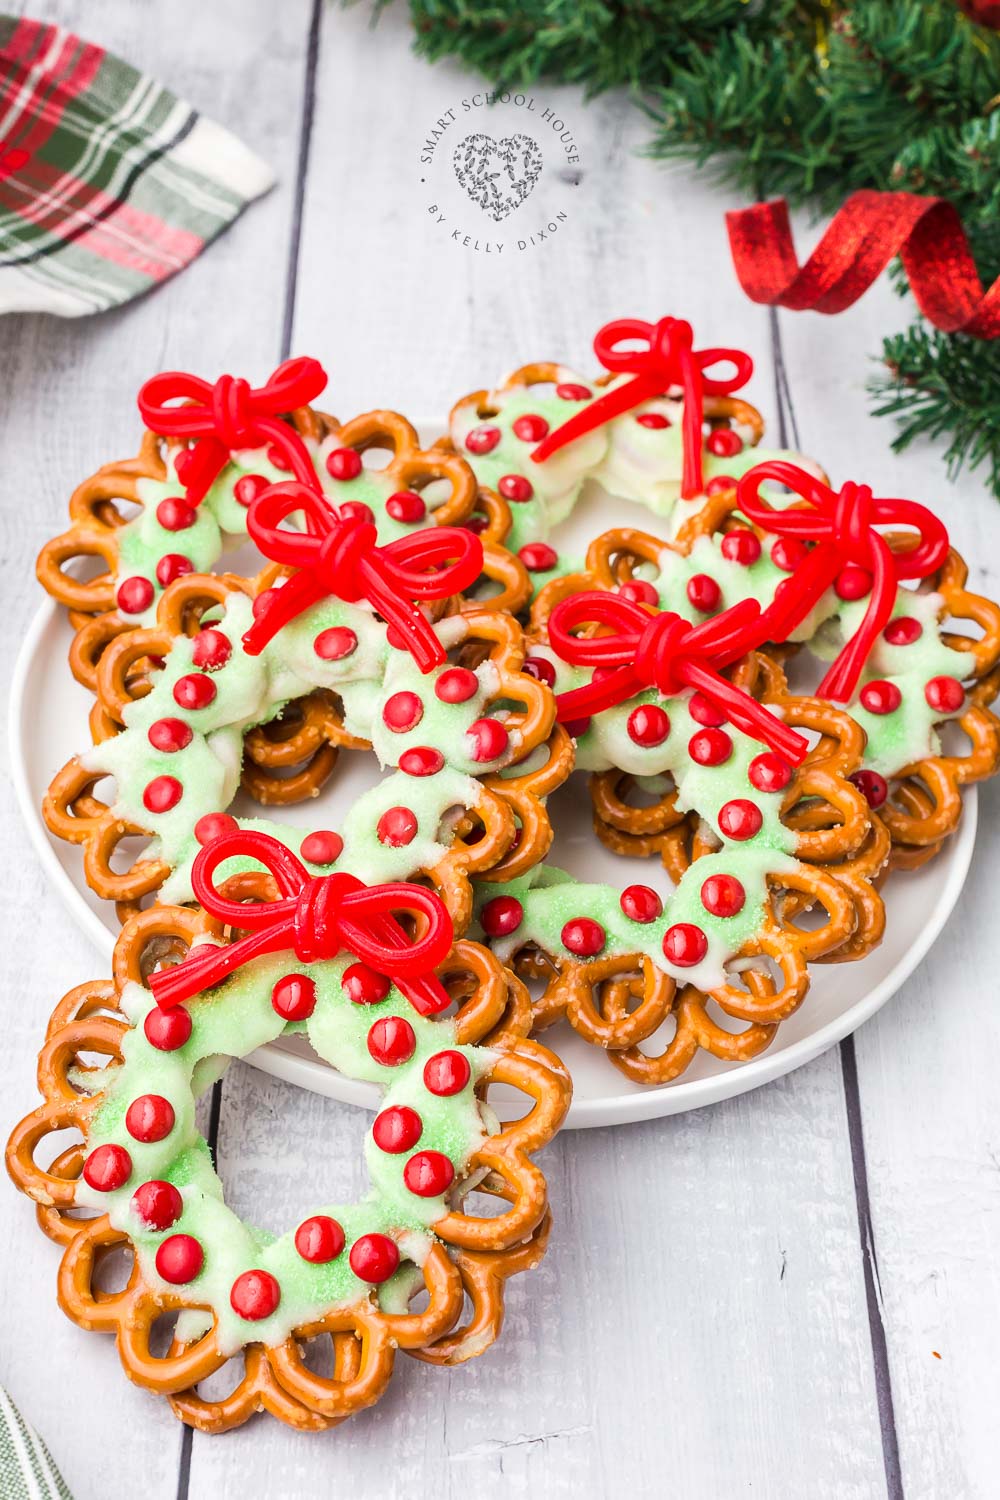 Pretzel Wreaths with a red licorice bow are an adorable and festive Christmas food craft idea! A favorite holiday treat.